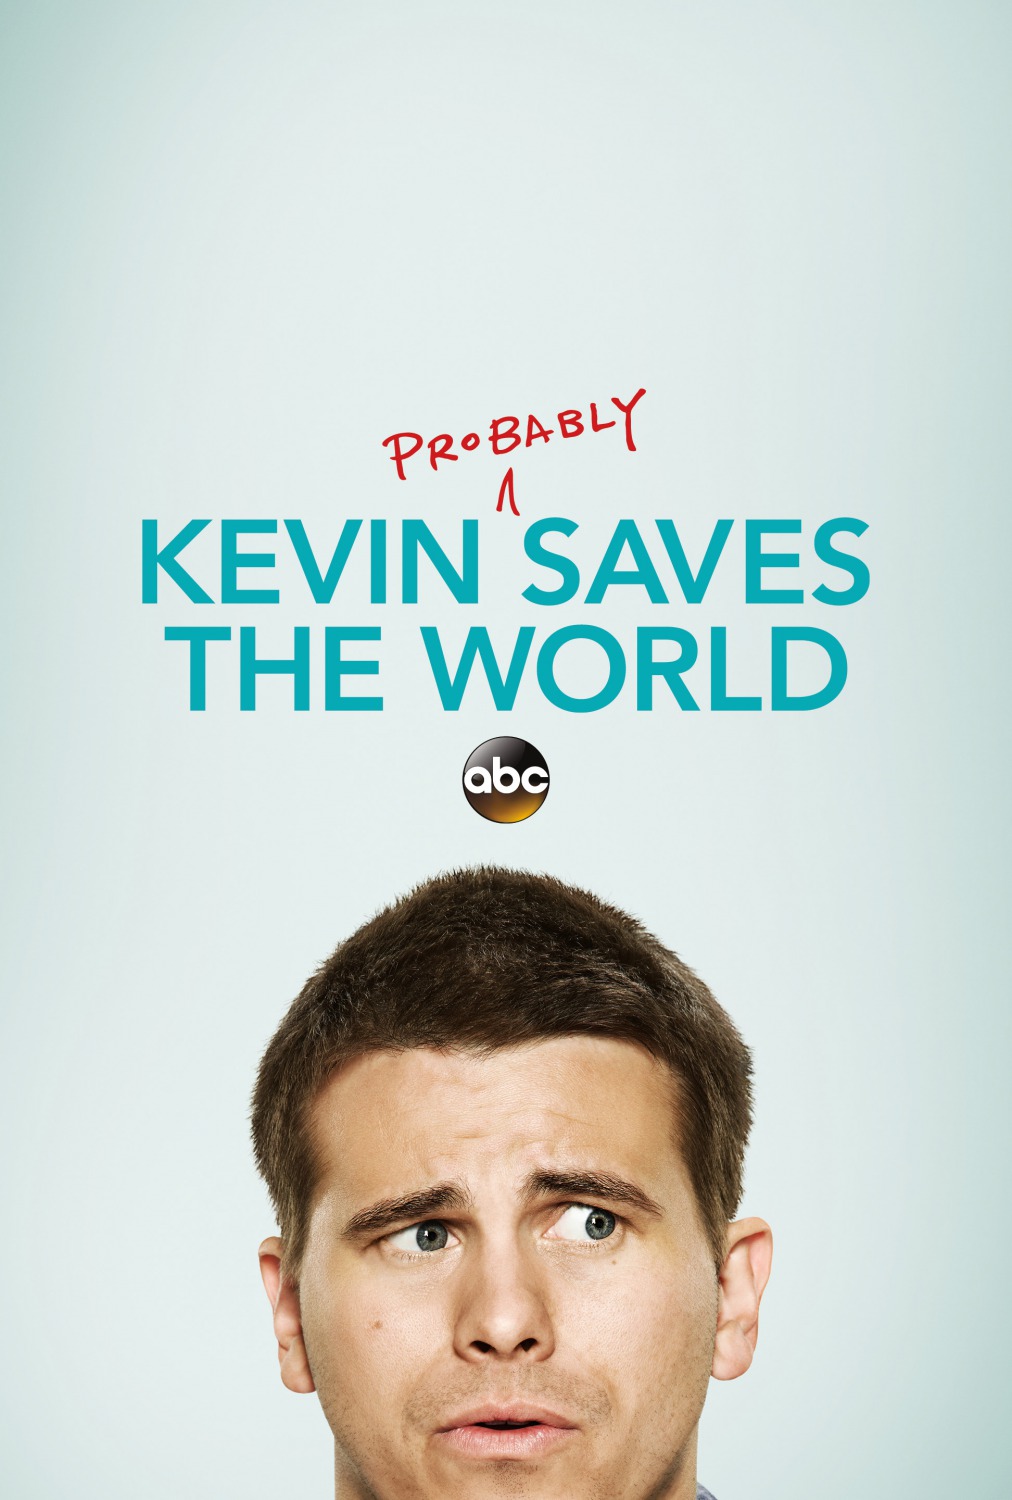 kevin_probably_saves_the_world_xlg.jpg